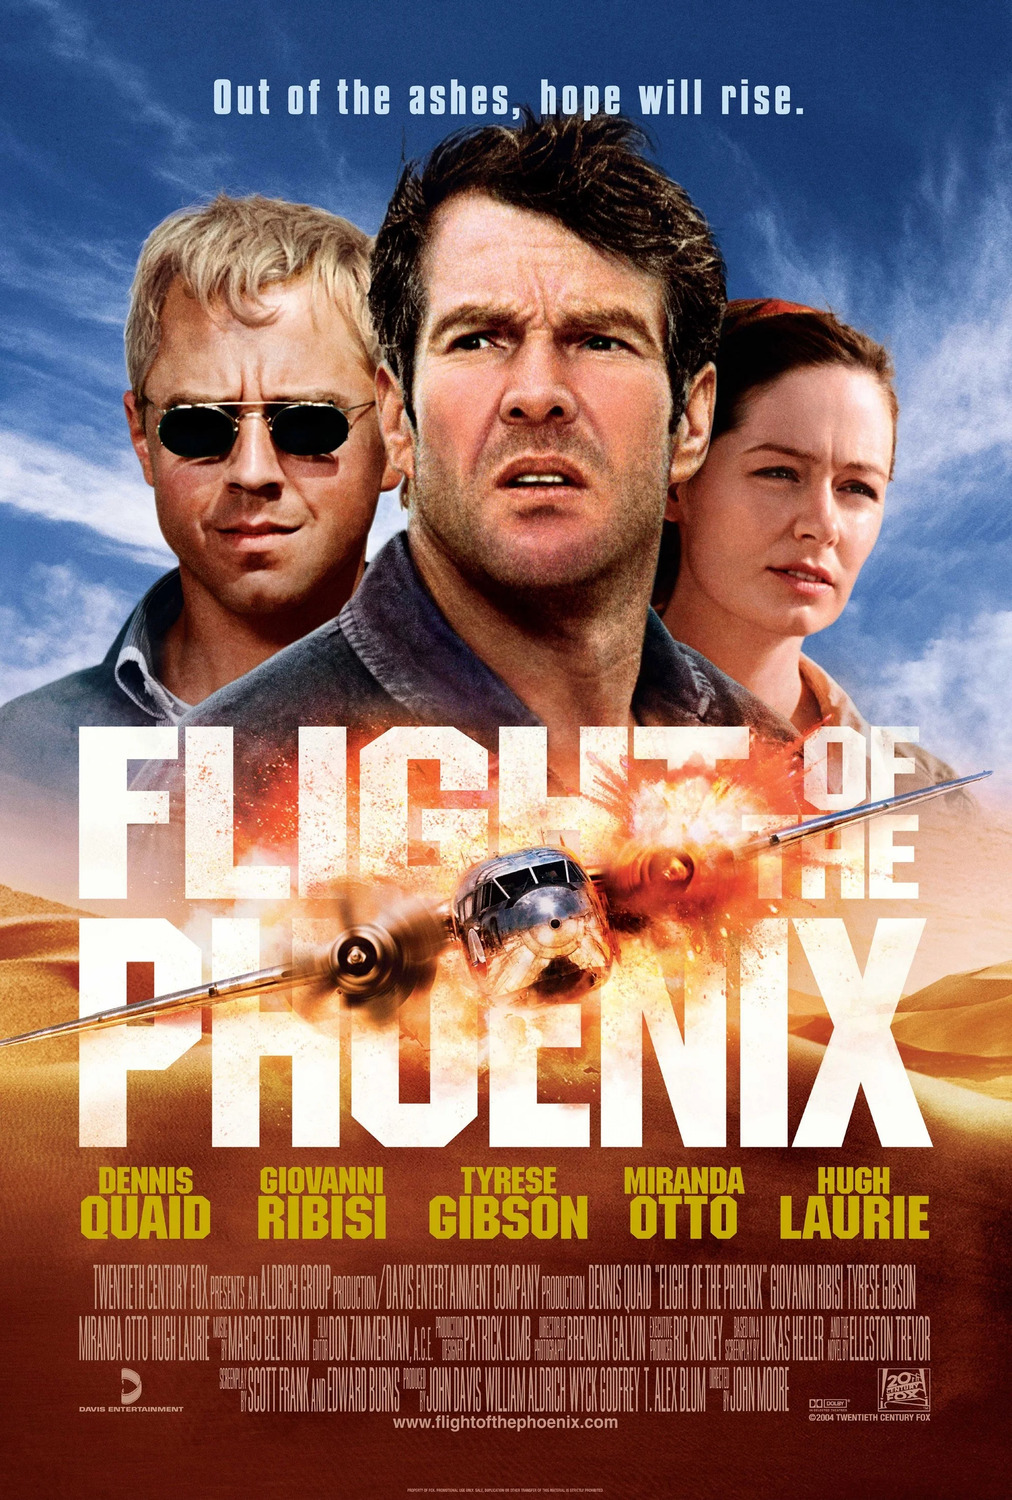 Extra Large Movie Poster Image for Flight of the Phoenix (#4 of 4)